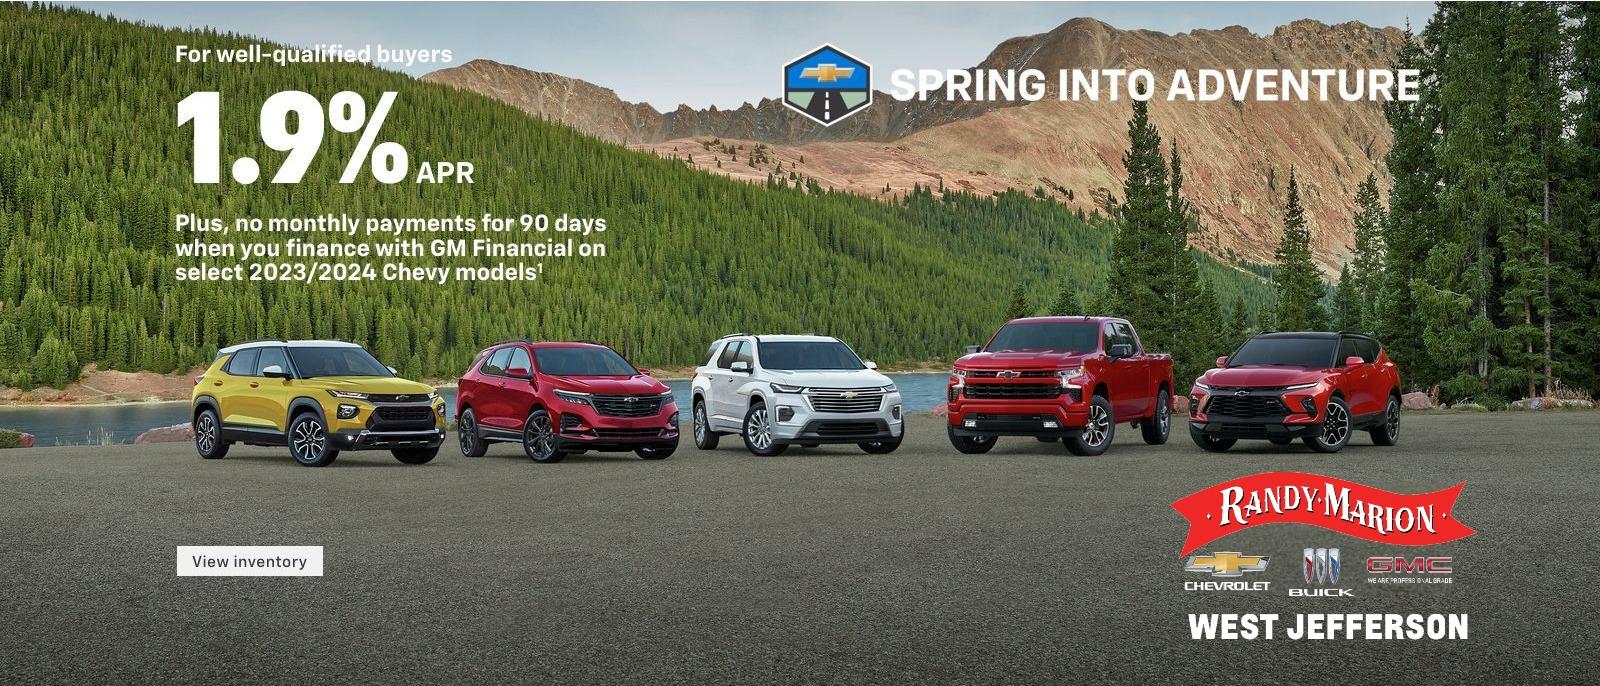 GET SPECIAL FINANCING AT RANDY MARON CHEVROLET BUICK GMC OF WEST JEFFERSON